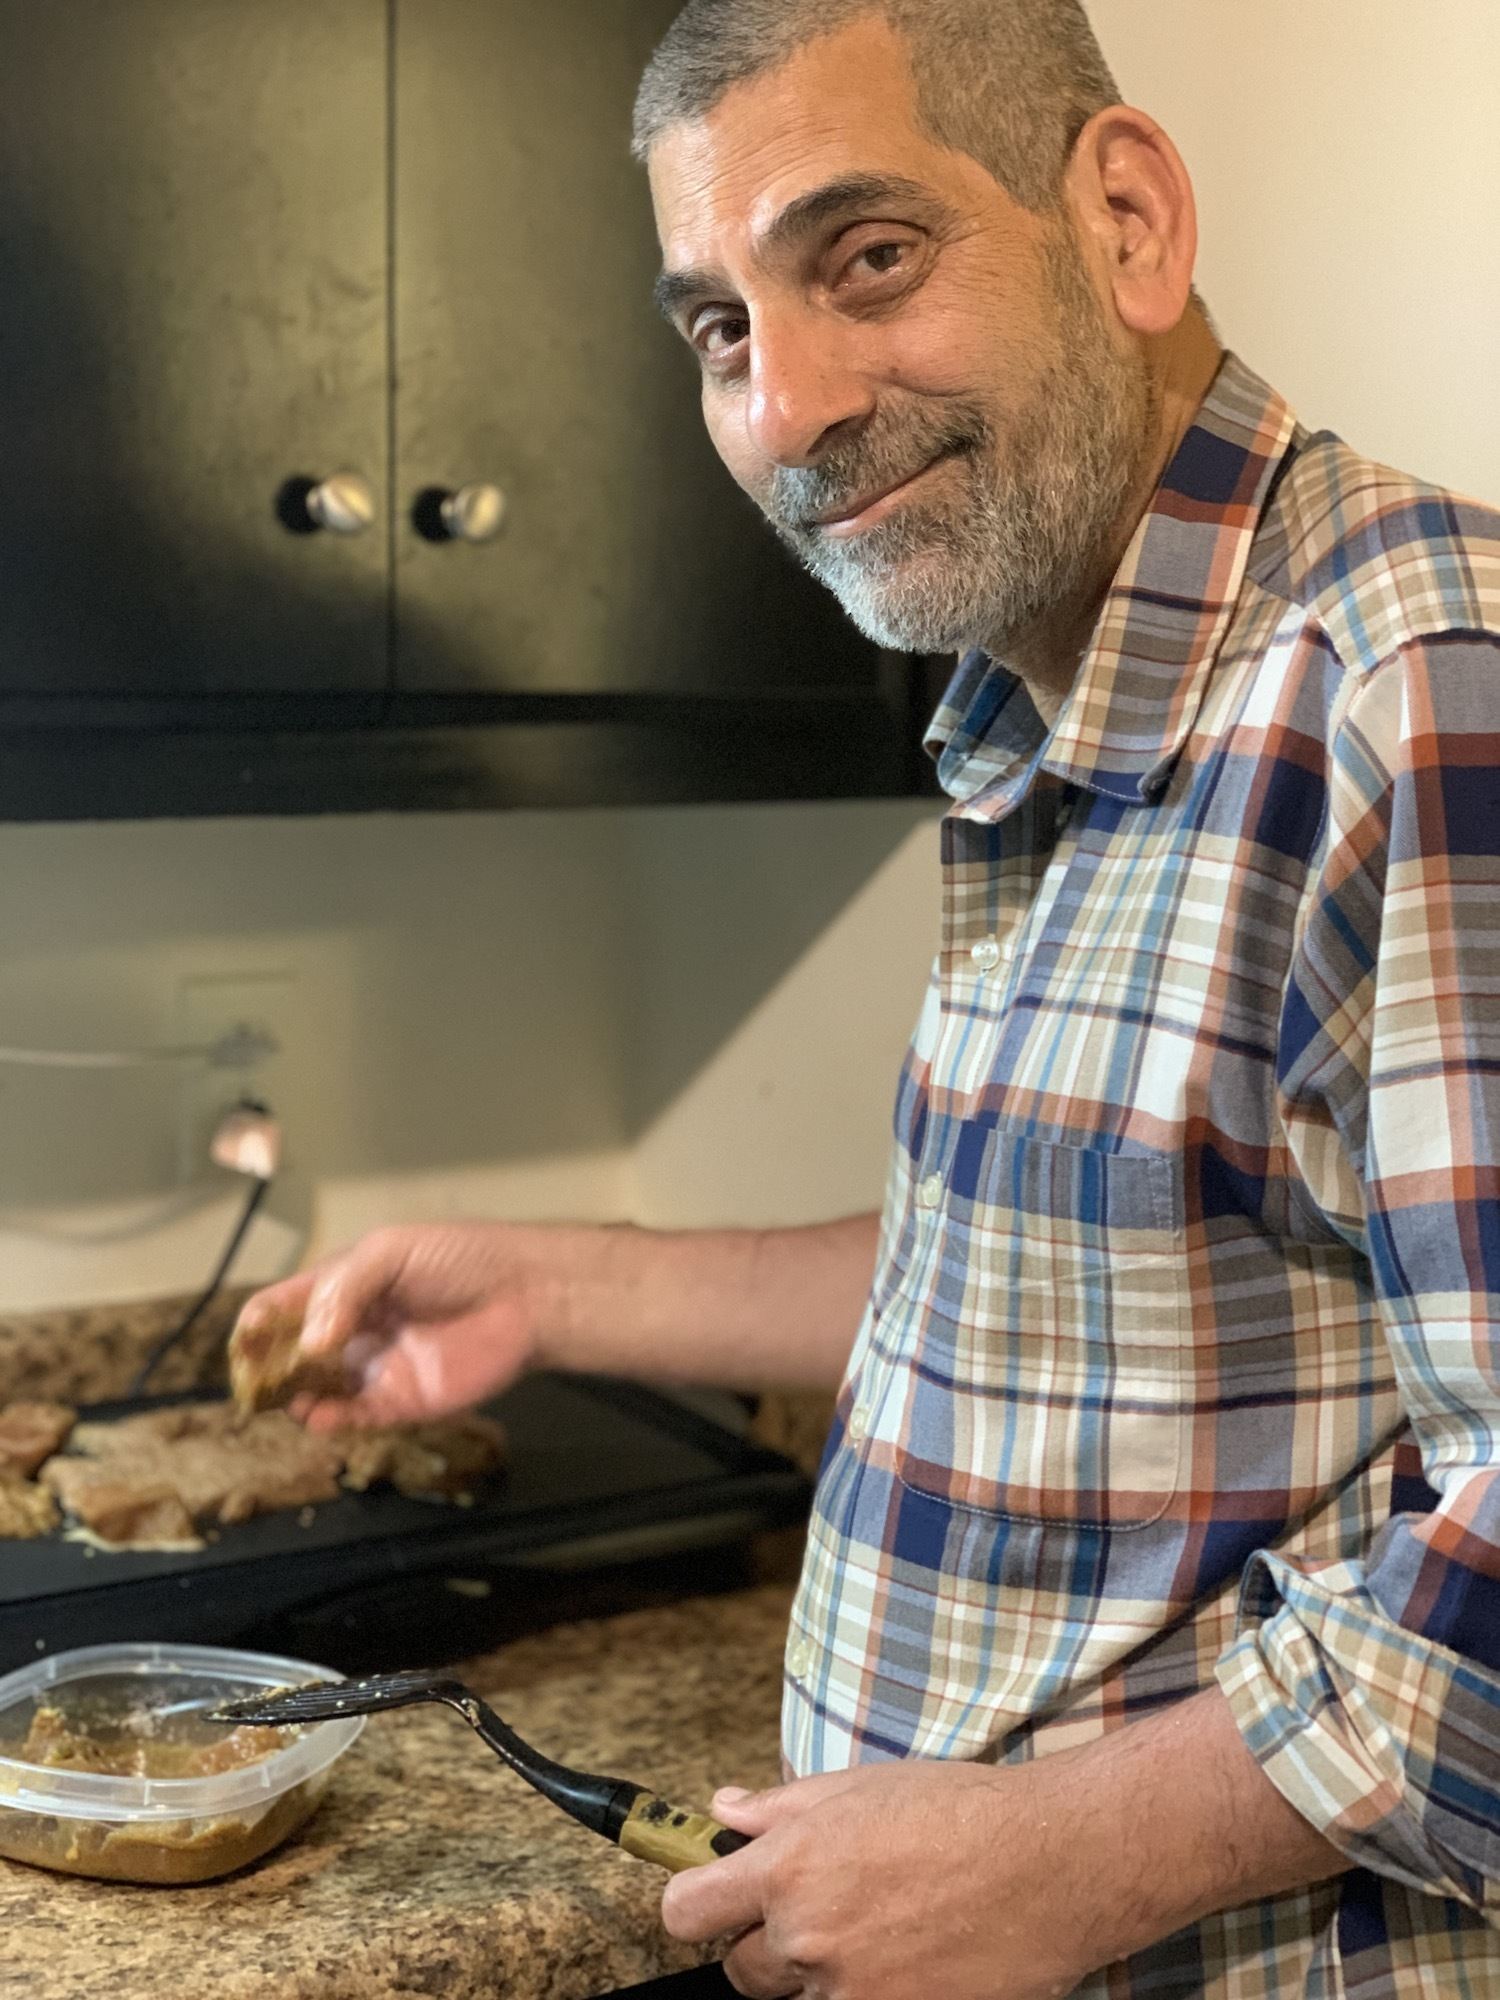 Syed Abidi holding a spatula while he cooks beef for dinner July 2020